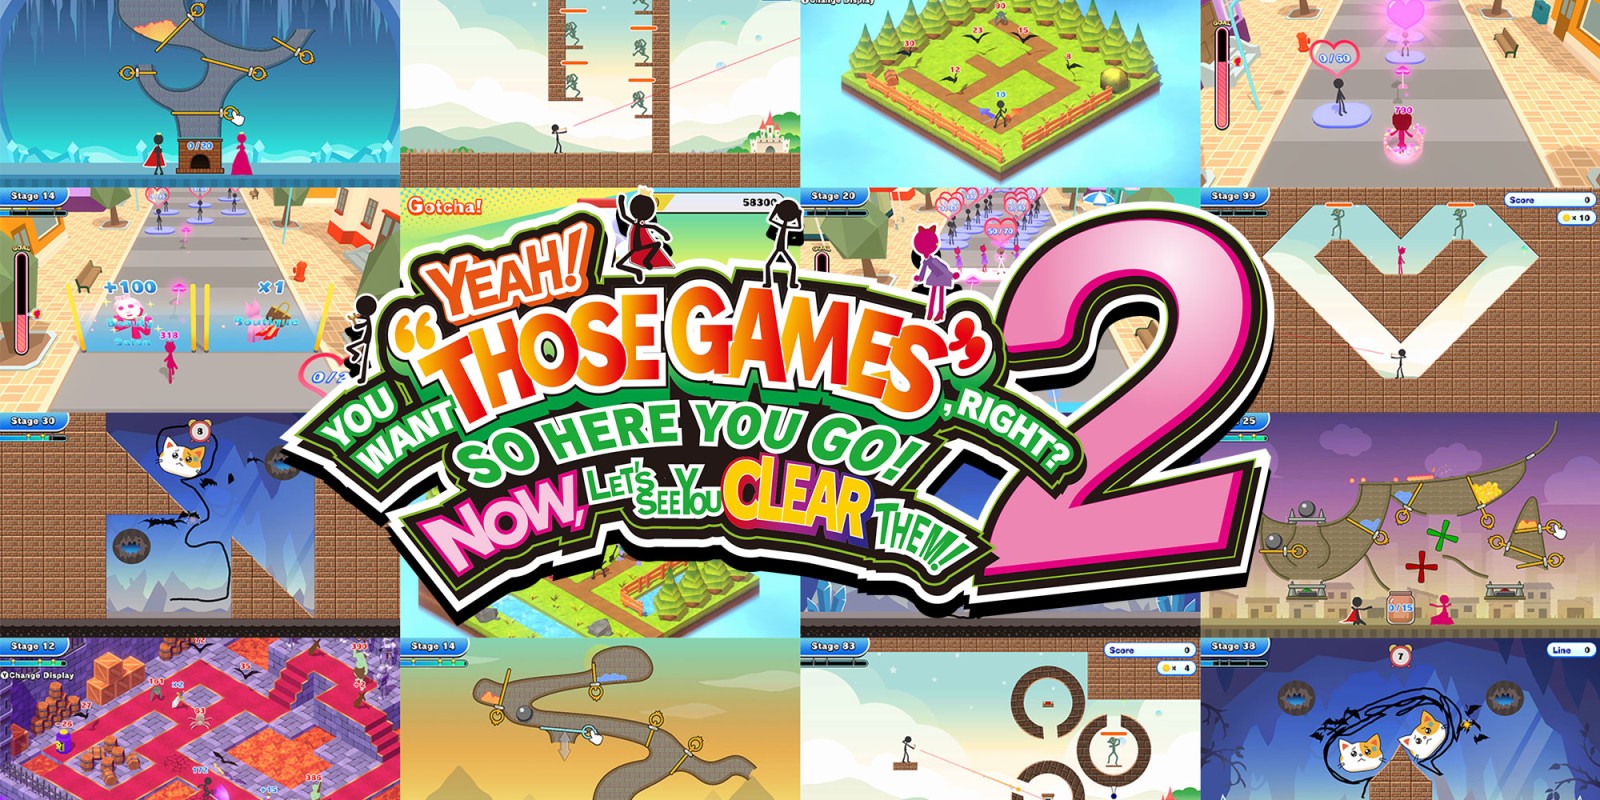 YEAH! YOU WANT "THOSE GAMES," RIGHT? SO HERE YOU GO! NOW, LET'S SEE YOU CLEAR THEM! 2